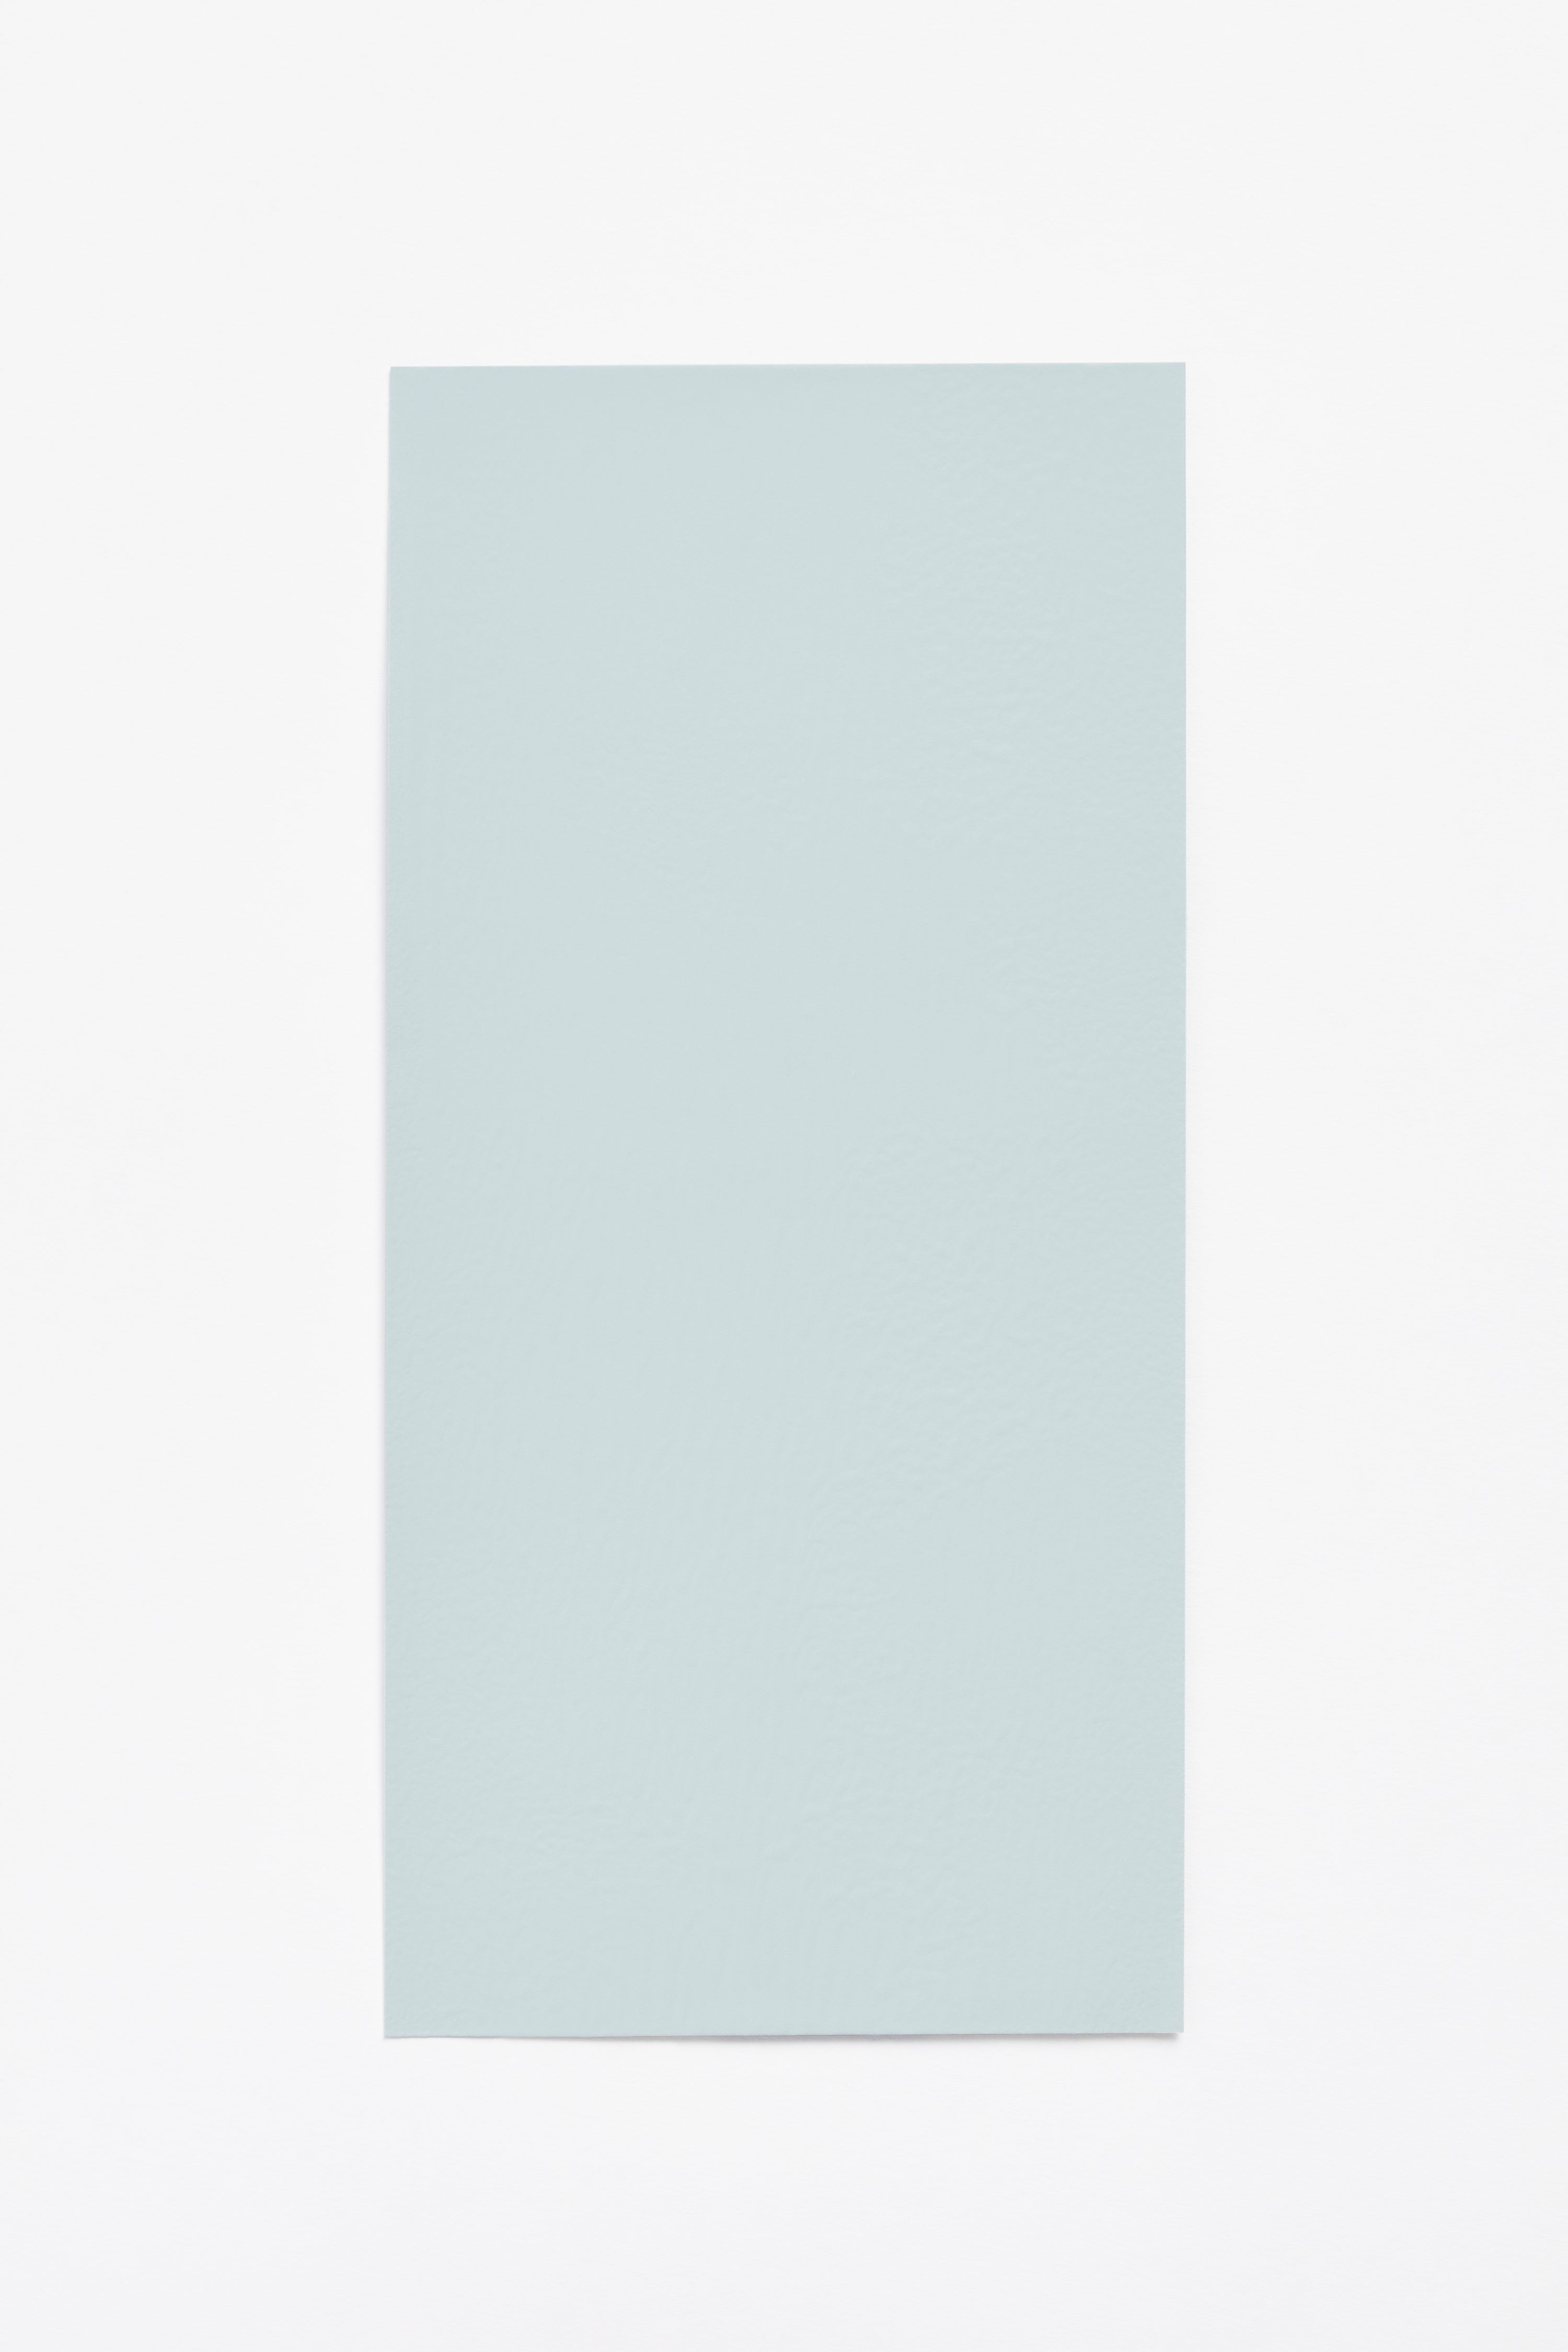 Manganese — a paint colour developed by Barber Osgerby for Blēo